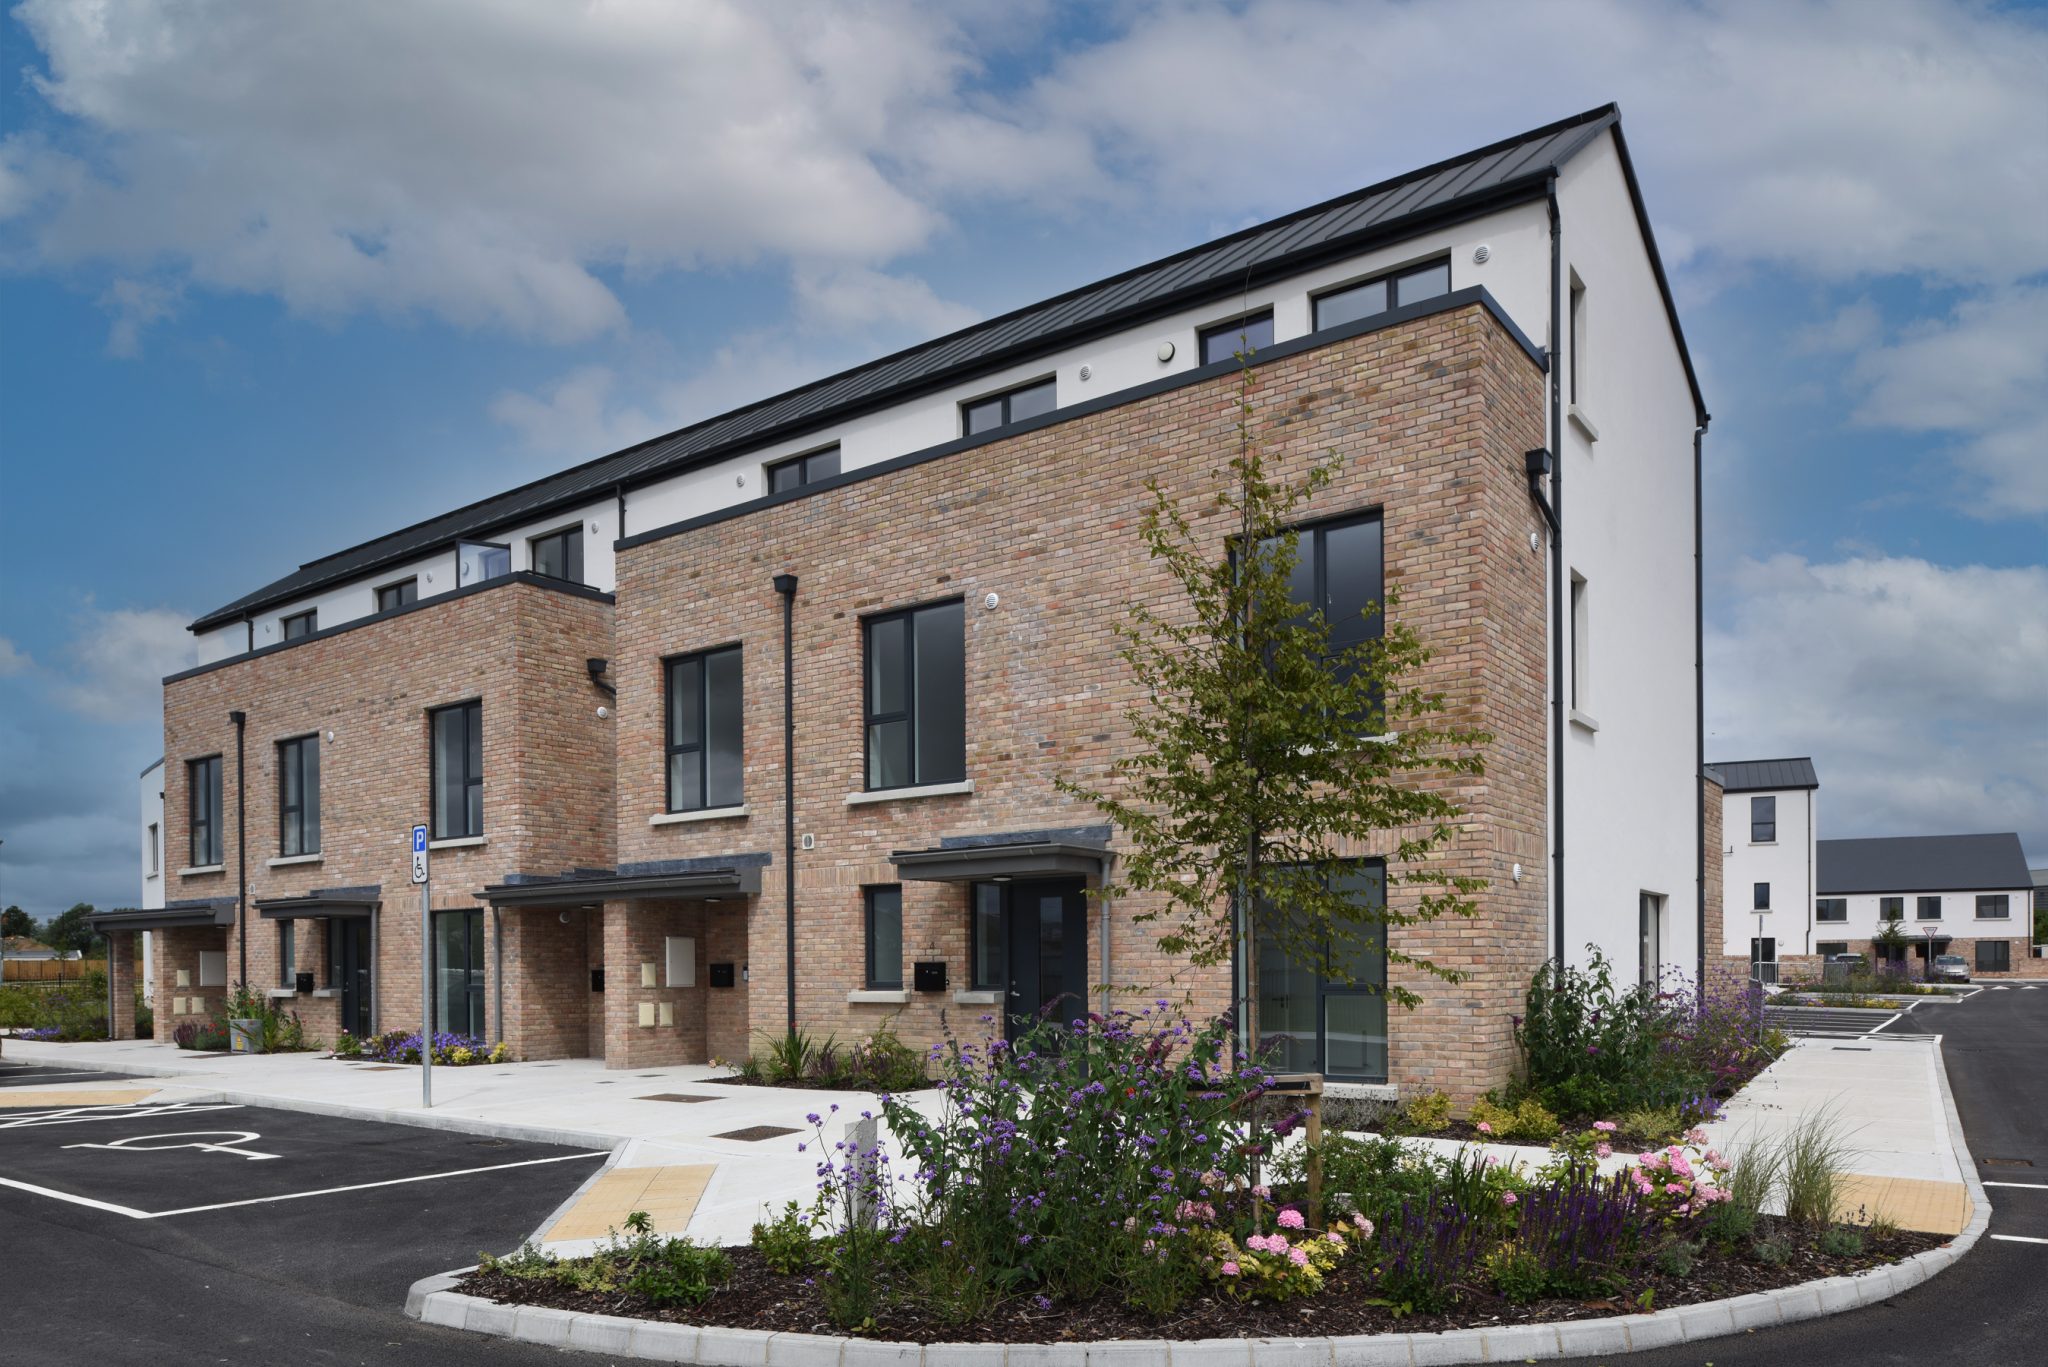 Successful Completion of Residential Development at Liscappagh (Cappaghfinn Phase 3), Finglas, Dublin 11.